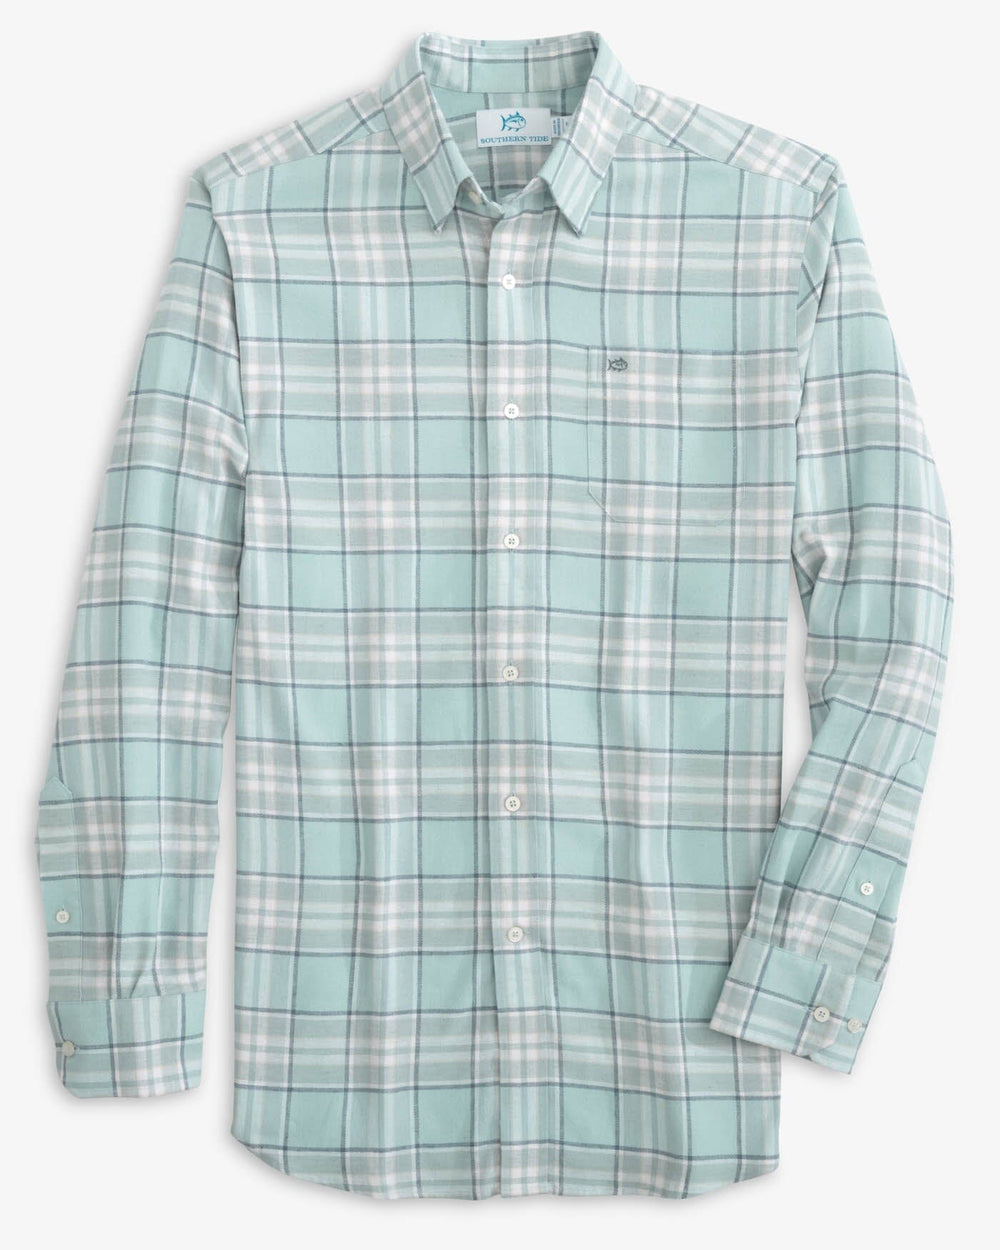 The front view of the Southern Tide Beach Flannel Heather Reddick Plaid Sport Shirt by Southern Tide - Heather Summer Aqua